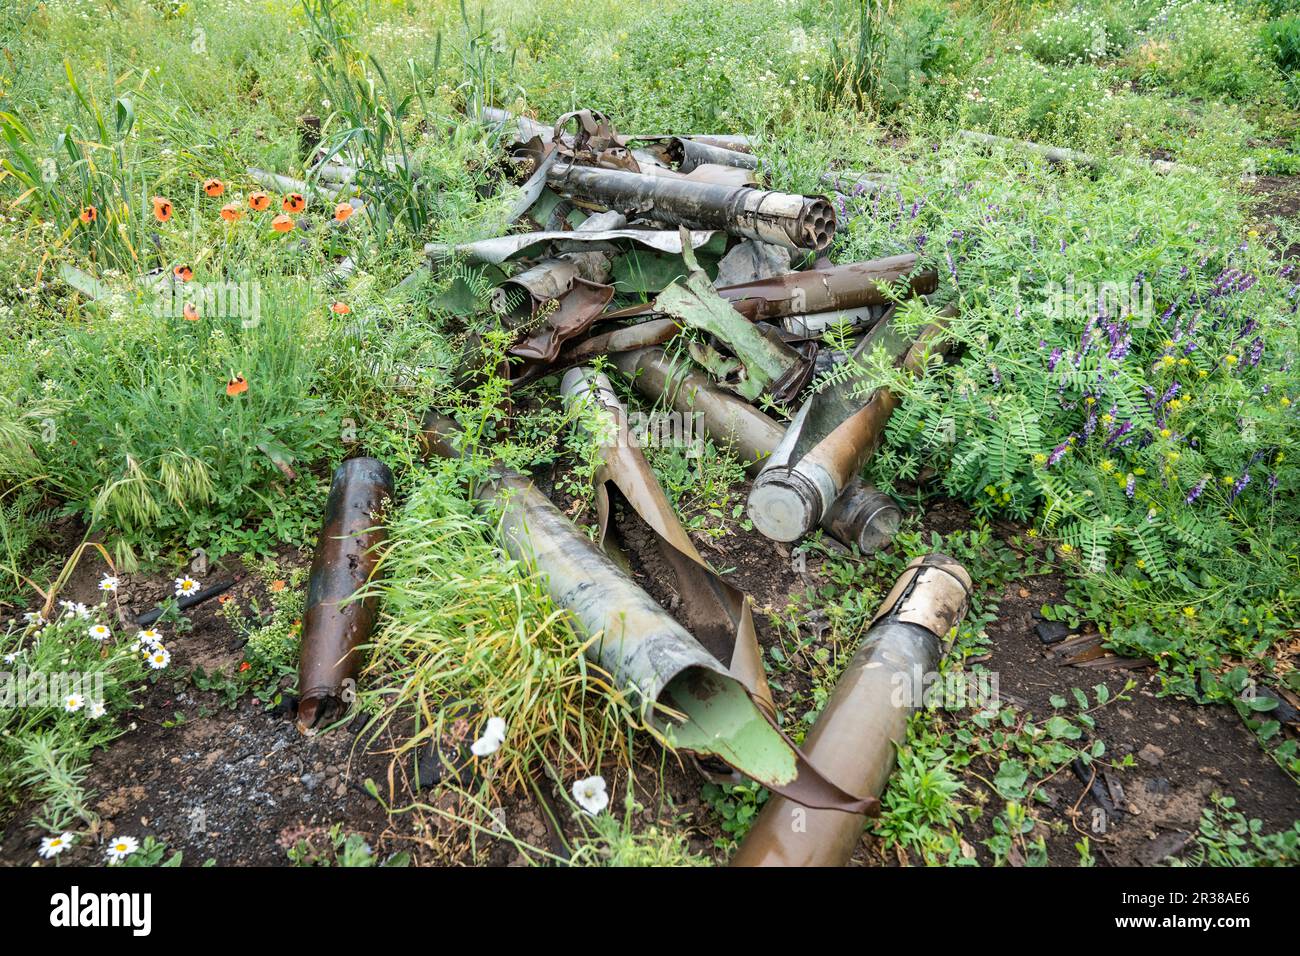 Remnants of shells and rockets used by Russian forces against Ukraine collected by de-mining unit of National Guards of Ukraine ready for scrap removal seen in near Kherson in Ukraine on May 22, 2023 Stock Photo